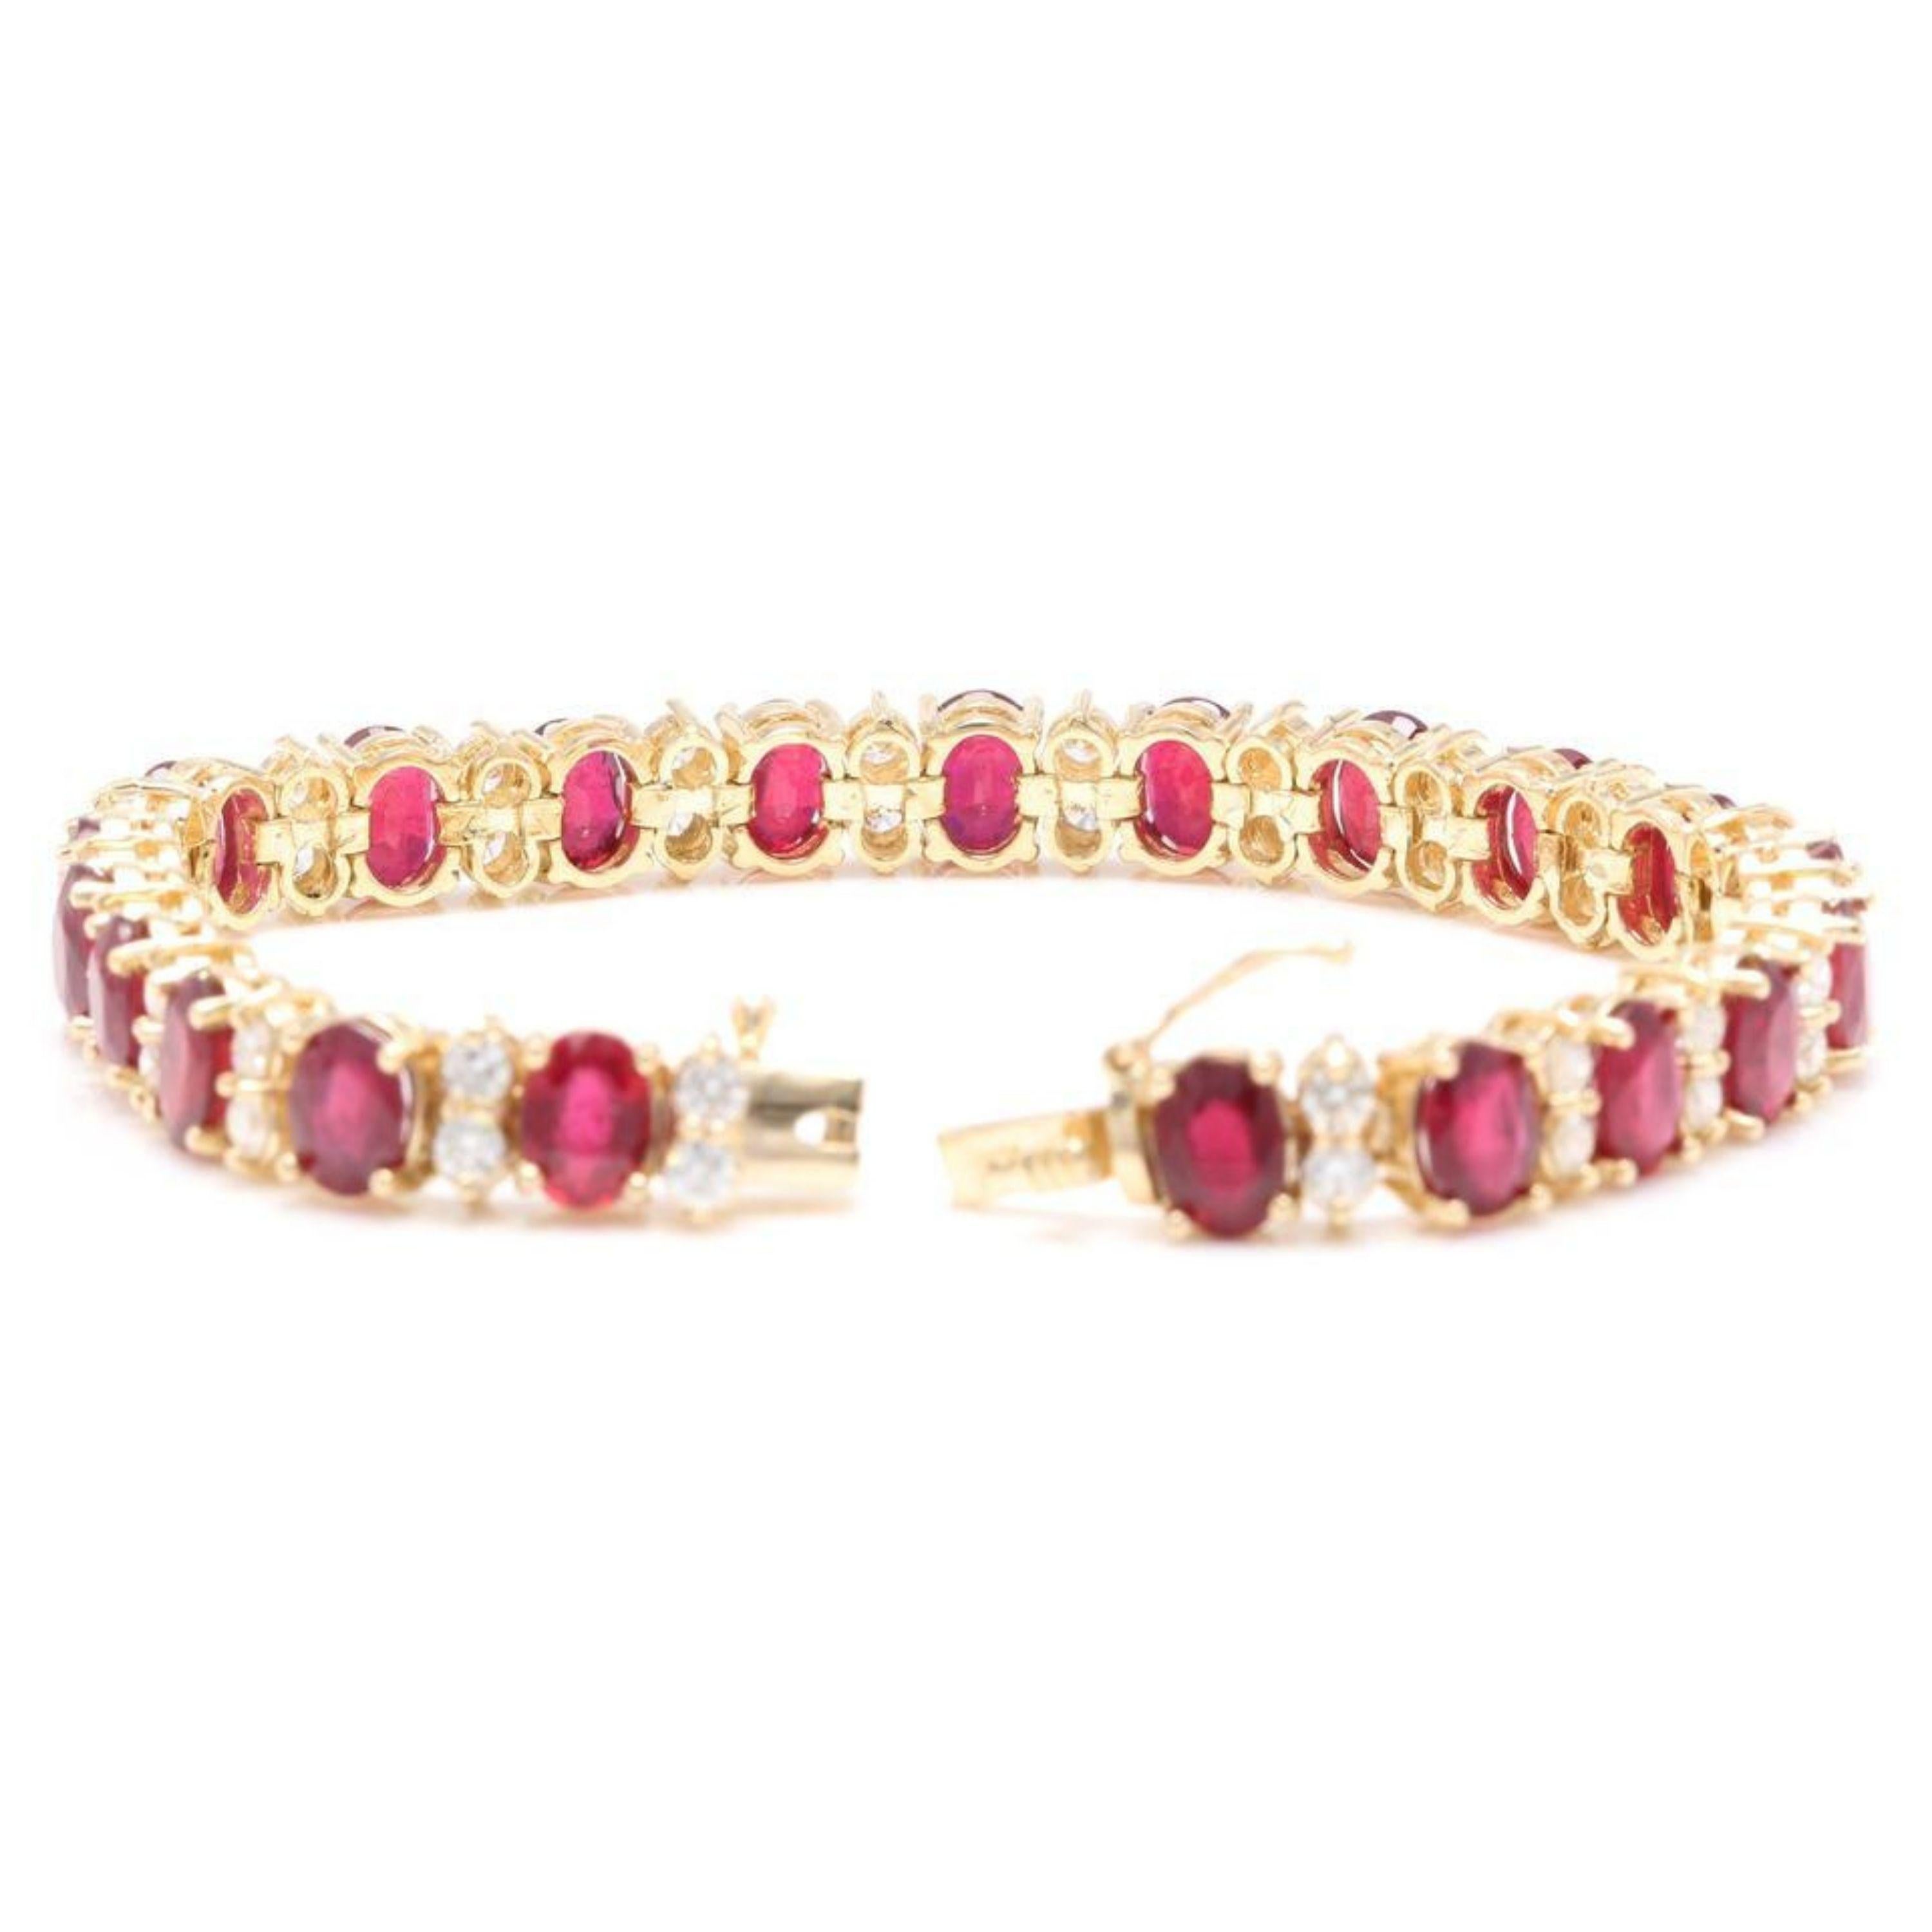 Mixed Cut Very Beautiful 29.80 Carat Ruby and Natural Diamond 14 Karat Solid Gold Bracelet For Sale